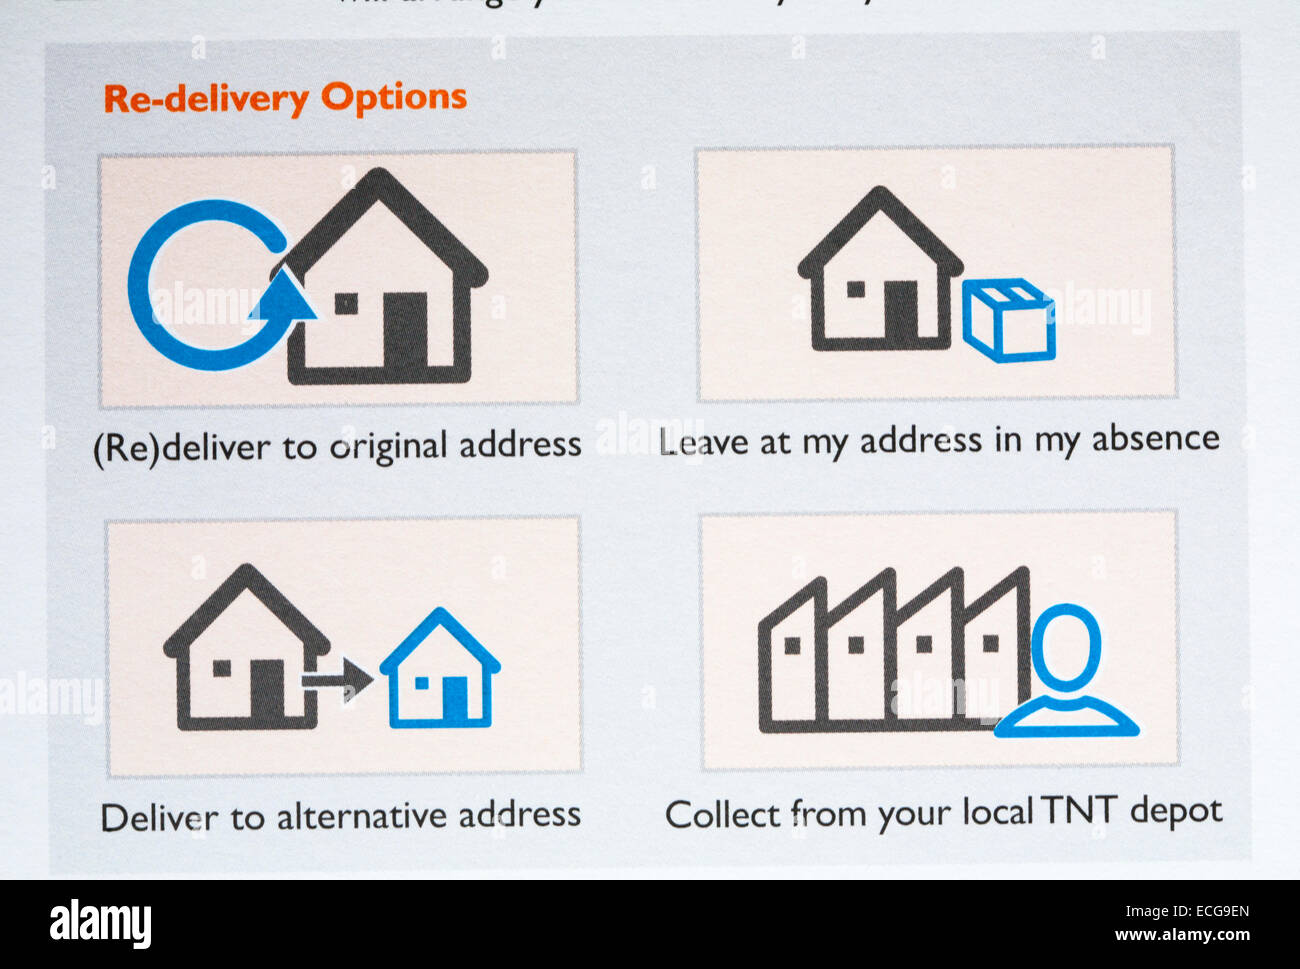 Re-delivery options on TNT sorry we missed you card left by TNT courier as no one home to receive parcel package mail Stock Photo